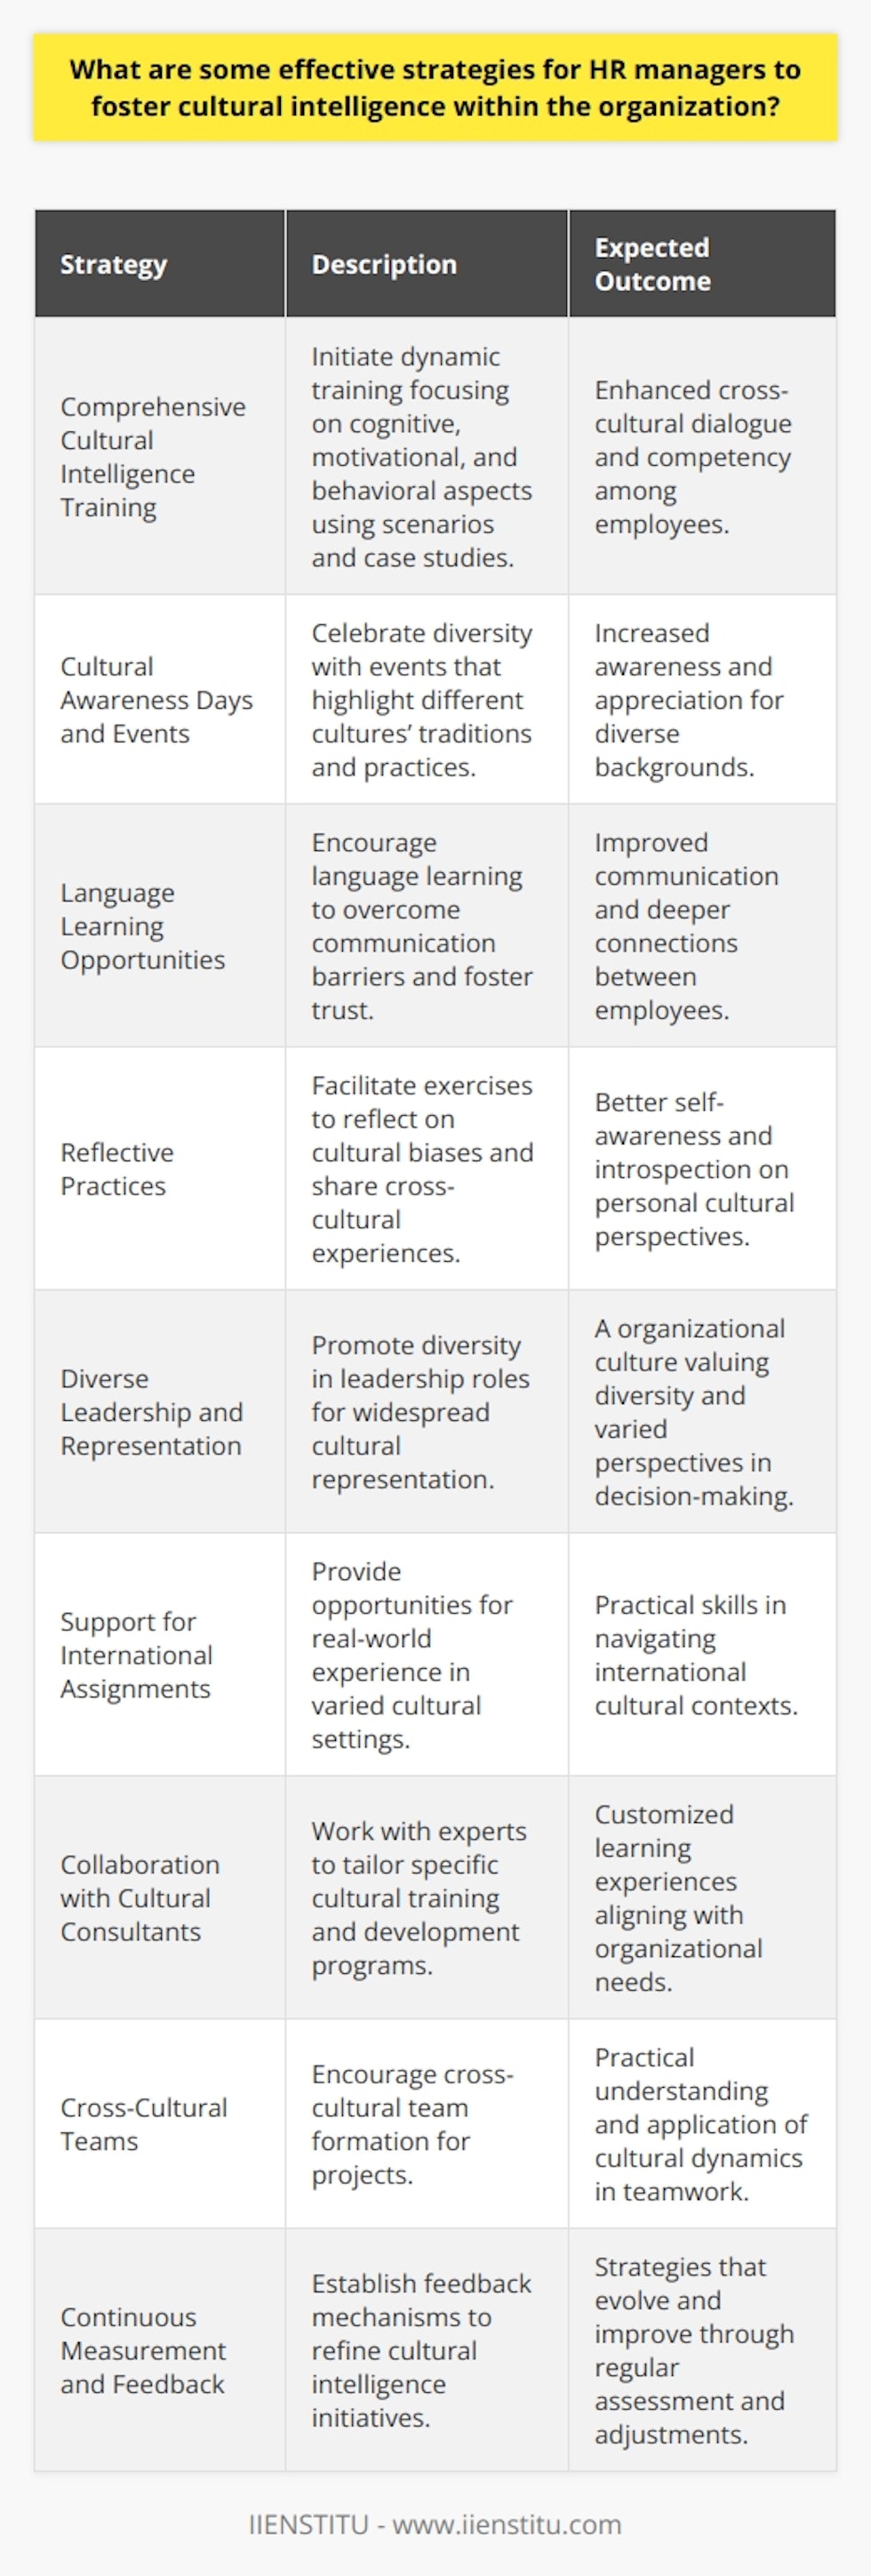 Cultural intelligence is a critical component in the toolkit of modern organizations, especially as businesses become increasingly global. HR managers play a pivotal role in embedding cultural intelligence within the organization, thereby enhancing cross-cultural understanding, collaboration, and overall performance. Below are effective strategies that HR managers can adopt to foster cultural intelligence:1. Comprehensive Cultural Intelligence Training: HR managers should initiate regular, dynamic cultural intelligence training programs that not only educate but also engage employees. These should focus on the core components of cultural intelligence – cognitive (knowledge), motivational (drive), and behavioral (strategy and action). In these sessions, scenarios and case studies can be introduced to help employees navigate cross-cultural dialogues and challenges.2. Promotion of Cultural Awareness Days and Events: An innovative approach is to celebrate cultural diversity through events and awareness days. This helps in highlighting different cultural traditions, practices, and foods, contributing to a broader understanding and respect for diverse backgrounds.3. Language Learning Opportunities: Encouraging and providing resources for language learning helps in breaking barriers and in fostering deeper connections between employees. Basic language skills can be crucial to avoiding miscommunication and building trust.4. Encourage Reflective Practices: HR managers can facilitate reflective exercises where employees share their experiences with cultural differences and reflect on their personal cultural biases. This promotes self-awareness, a key element of cultural intelligence.5. Diverse Leadership and Representation: Having a diverse leadership team can help set a strong precedent for the value of cultural intelligence. HR managers can work on strategies to promote diversity in leadership roles, ensuring wide-ranging cultural representation within decision-making bodies.6. Support for International Assignments and Collaborations: Offering opportunities for employees to work on international projects or to undertake short-term international assignments can provide real-world experience of operating in different cultural contexts. This exposure is invaluable for developing cultural intelligence.7. Collaboration with Cultural Consultants: Working with cultural consultants or experts such as IIENSTITU, which offers a variety of professional development opportunities, can be a practical approach to immersing the organization in cultural learning. HR managers can collaborate with such partners to tailor training and development programs specific to the organization's needs.8. Cross-Cultural Teams: Encourage the formation of cross-cultural teams for projects. This real-time interaction with team members from different backgrounds can lead to a deeper understanding of cross-cultural dynamics and enhance cultural intelligence on the go.9. Continuous Measurement and Feedback: HR managers should establish mechanisms to measure the impact of cultural intelligence initiatives and actively solicit feedback. This will help to refine and improve strategies, making them more effective over time.Implementing these strategies requires ongoing commitment and involvement from HR managers and top leadership. However, when effectively applied, they can profoundly influence the organizational climate, leading to improved communication, stronger relationships, and ultimately, a more successful and culturally intelligent organization.